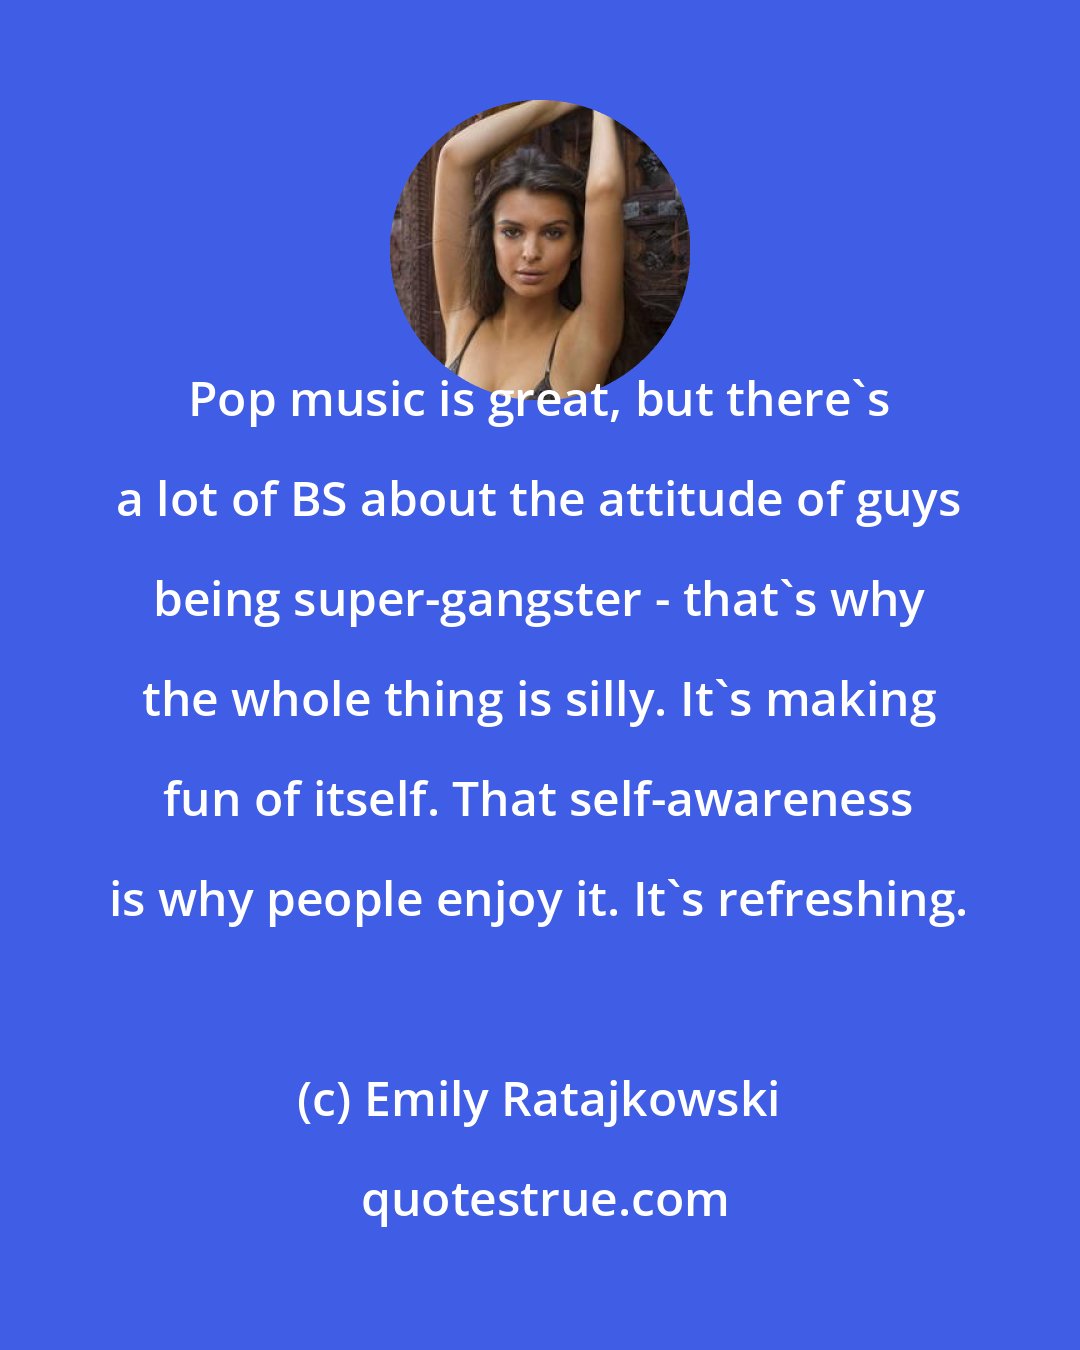 Emily Ratajkowski: Pop music is great, but there's a lot of BS about the attitude of guys being super-gangster - that's why the whole thing is silly. It's making fun of itself. That self-awareness is why people enjoy it. It's refreshing.